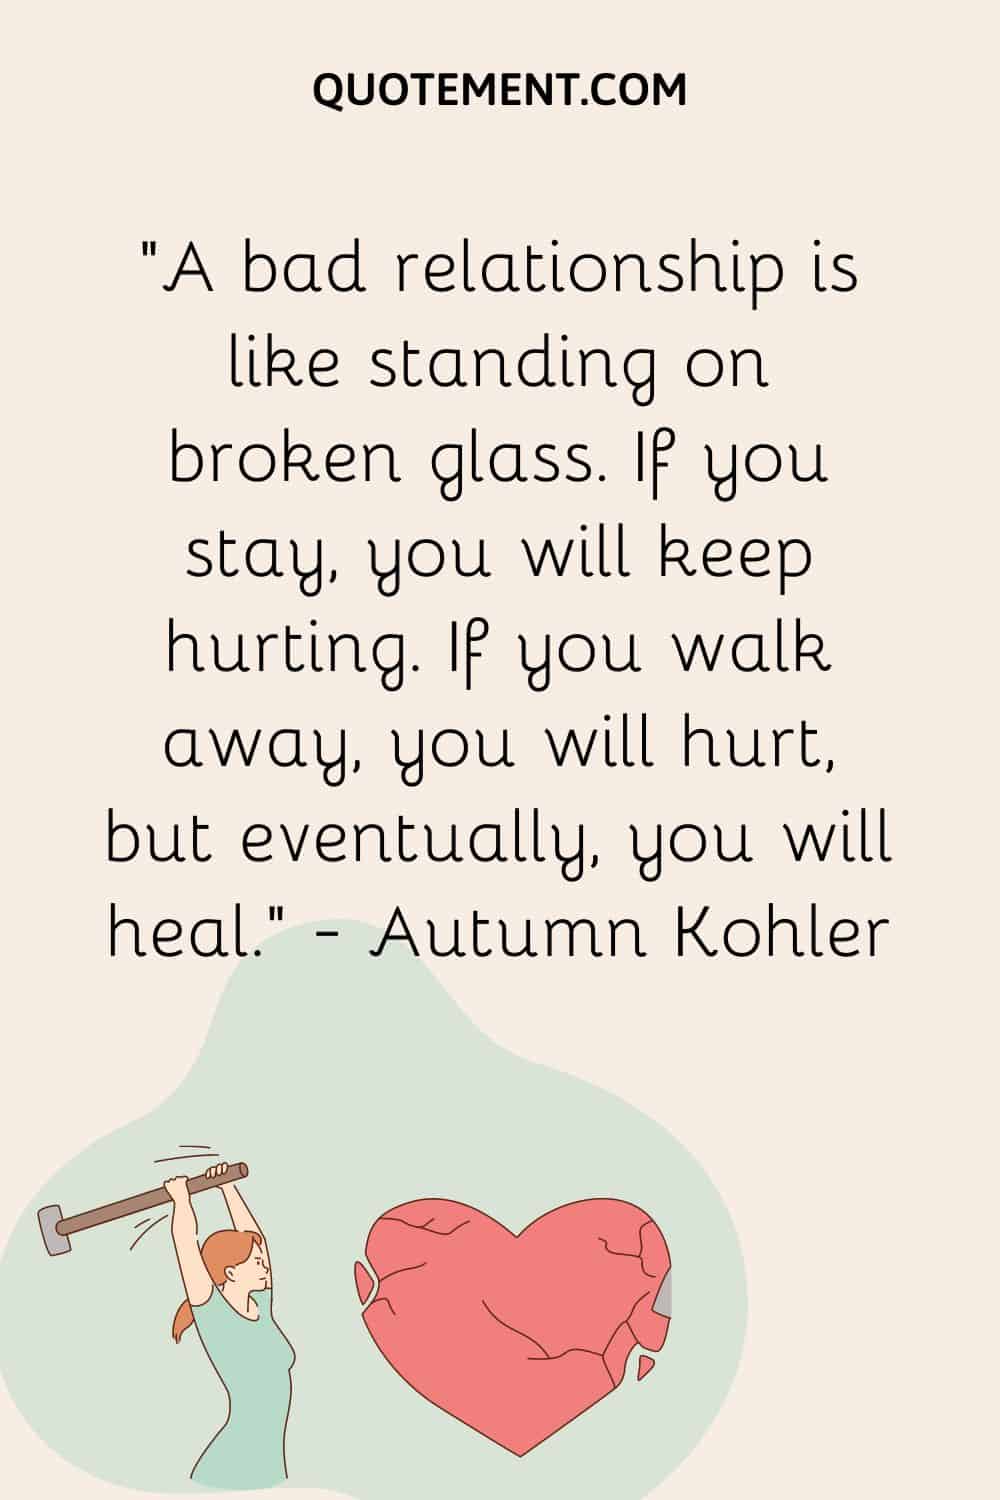 A bad relationship is like standing on broken glass